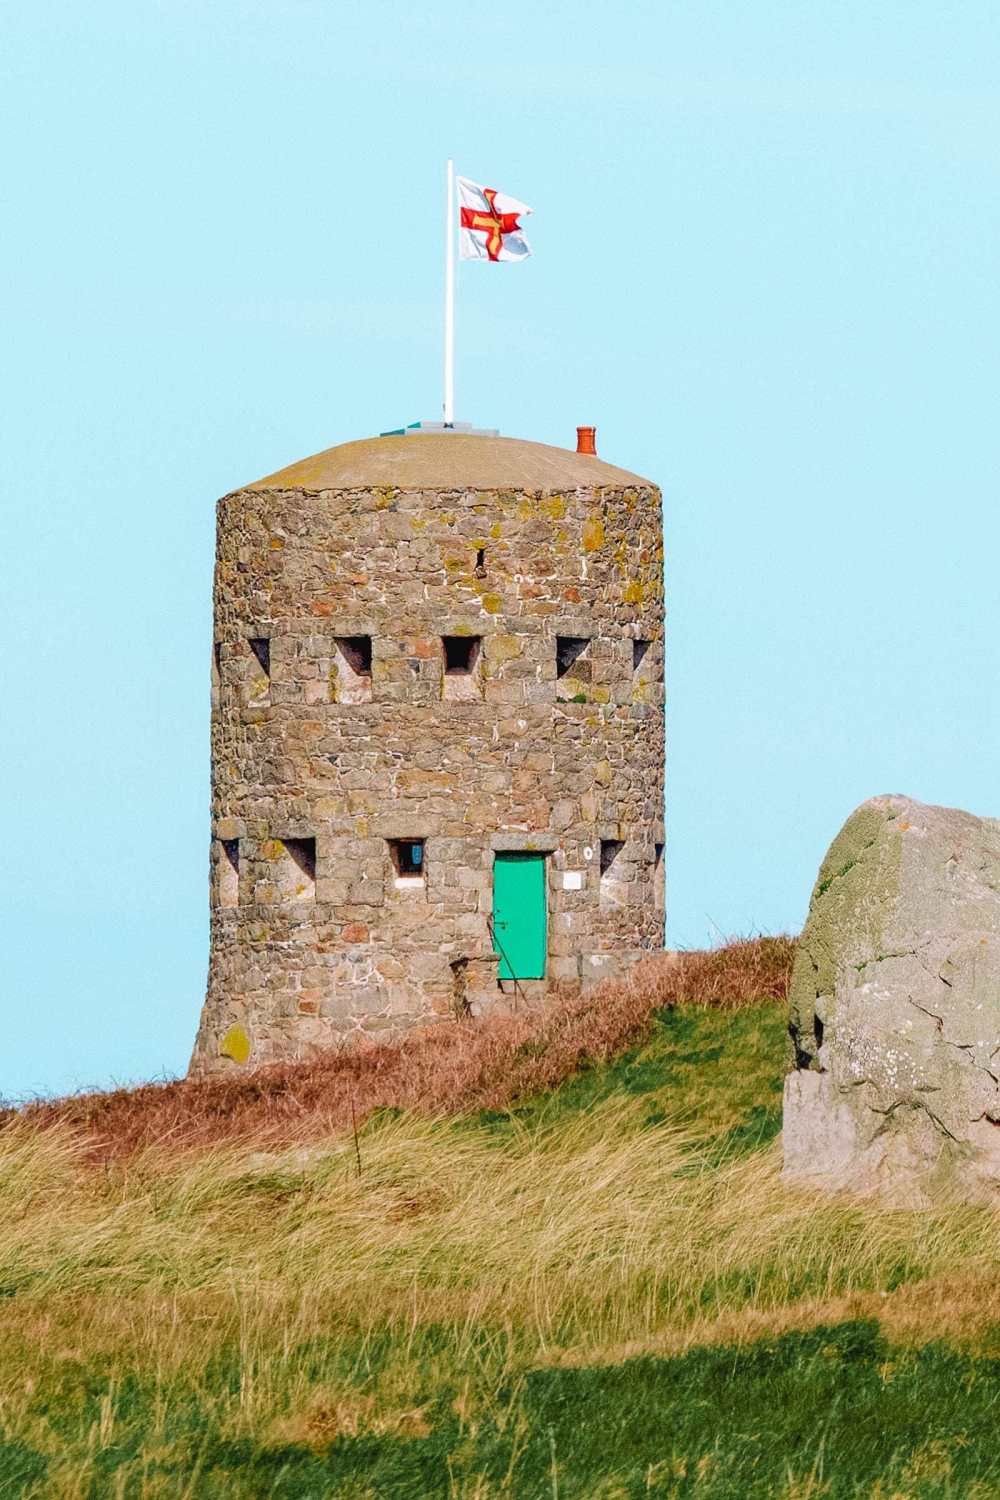 Loop hole Towers In Guernsey